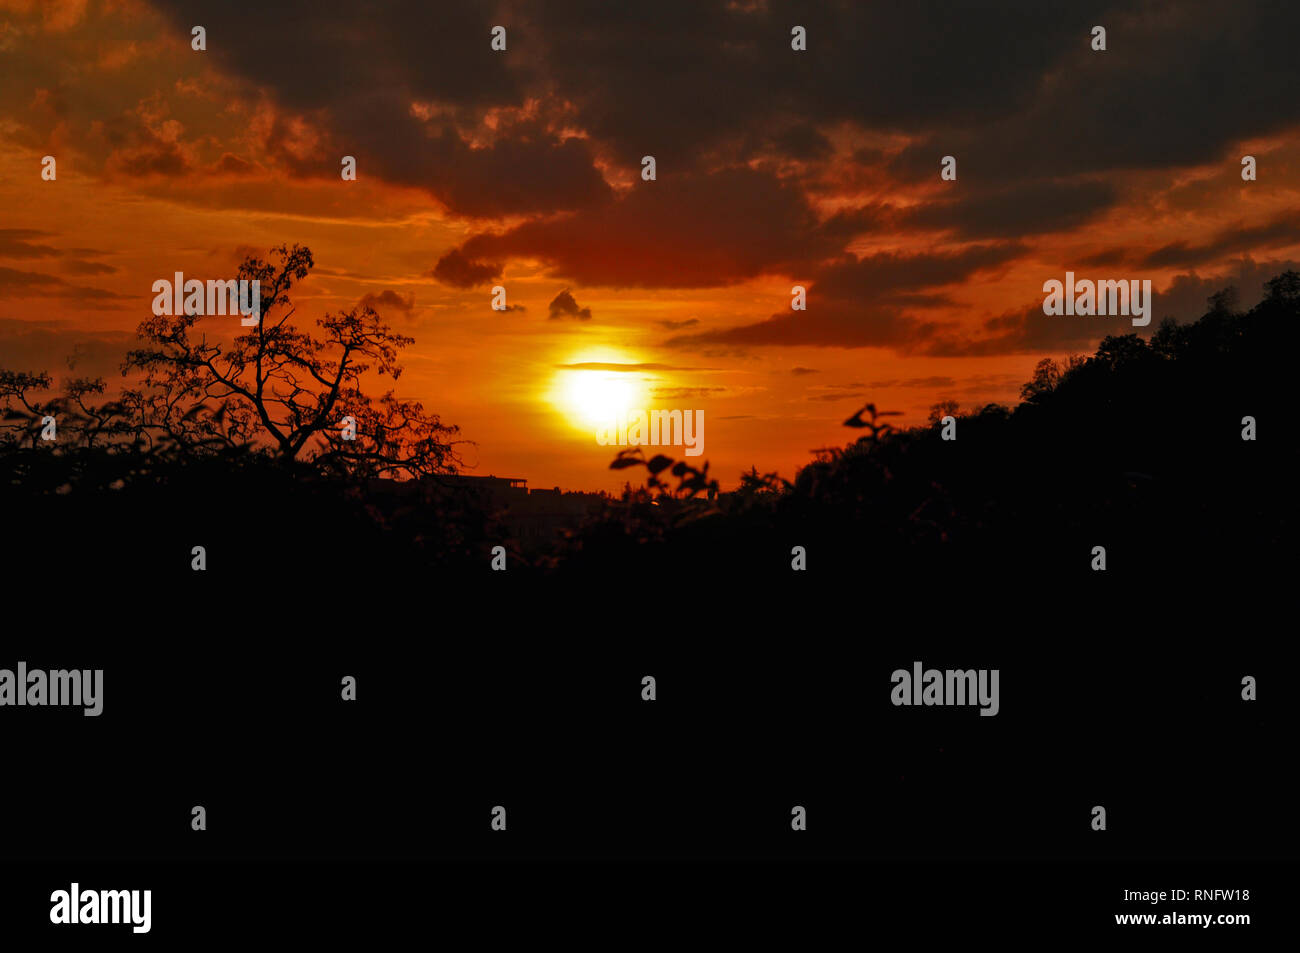 Landscape of a beautiful sunset with a silhouette of the nature in background in Safari Stock Photo